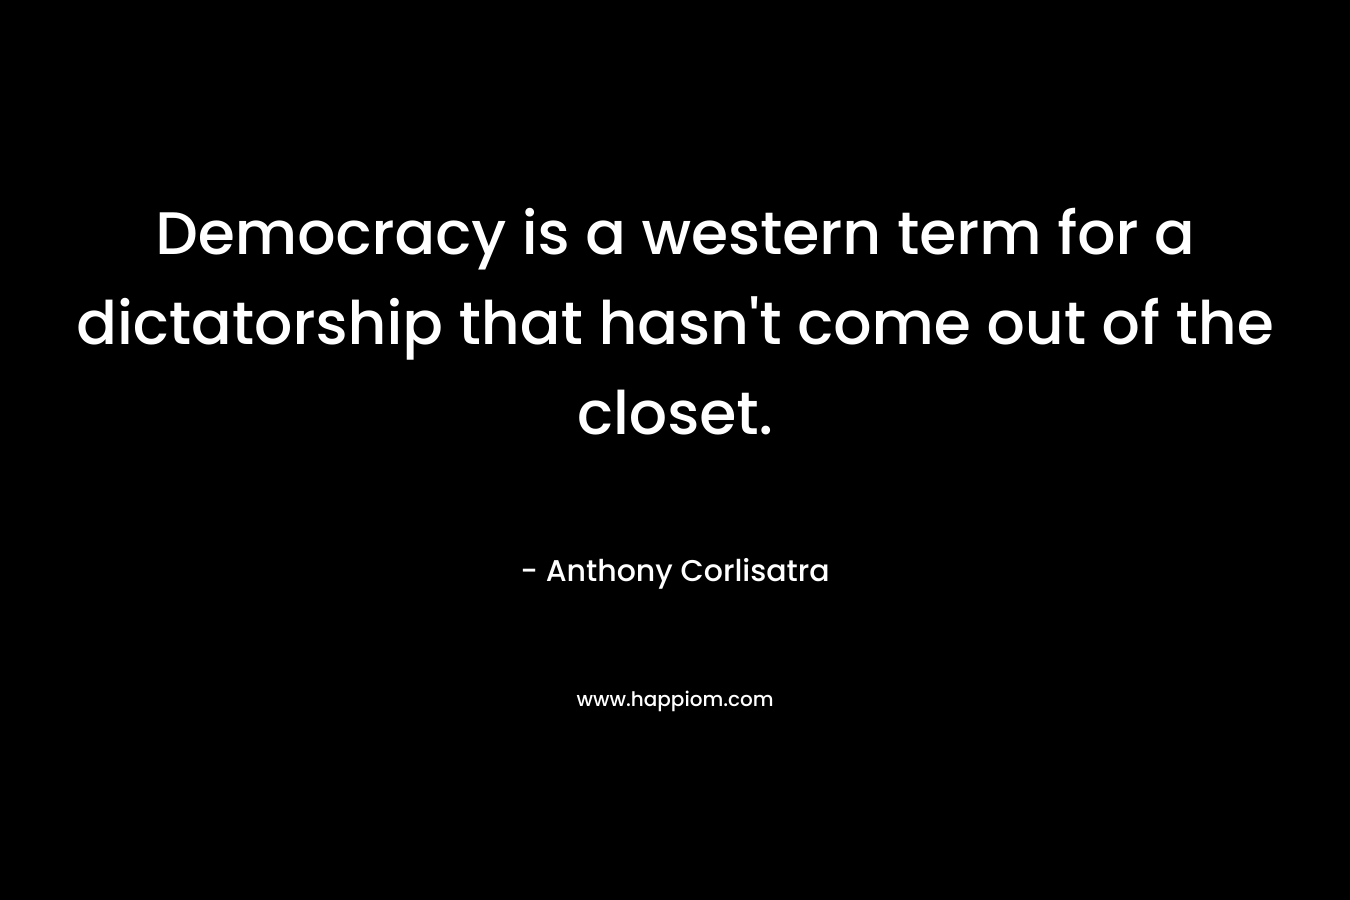 Democracy is a western term for a dictatorship that hasn’t come out of the closet. – Anthony Corlisatra